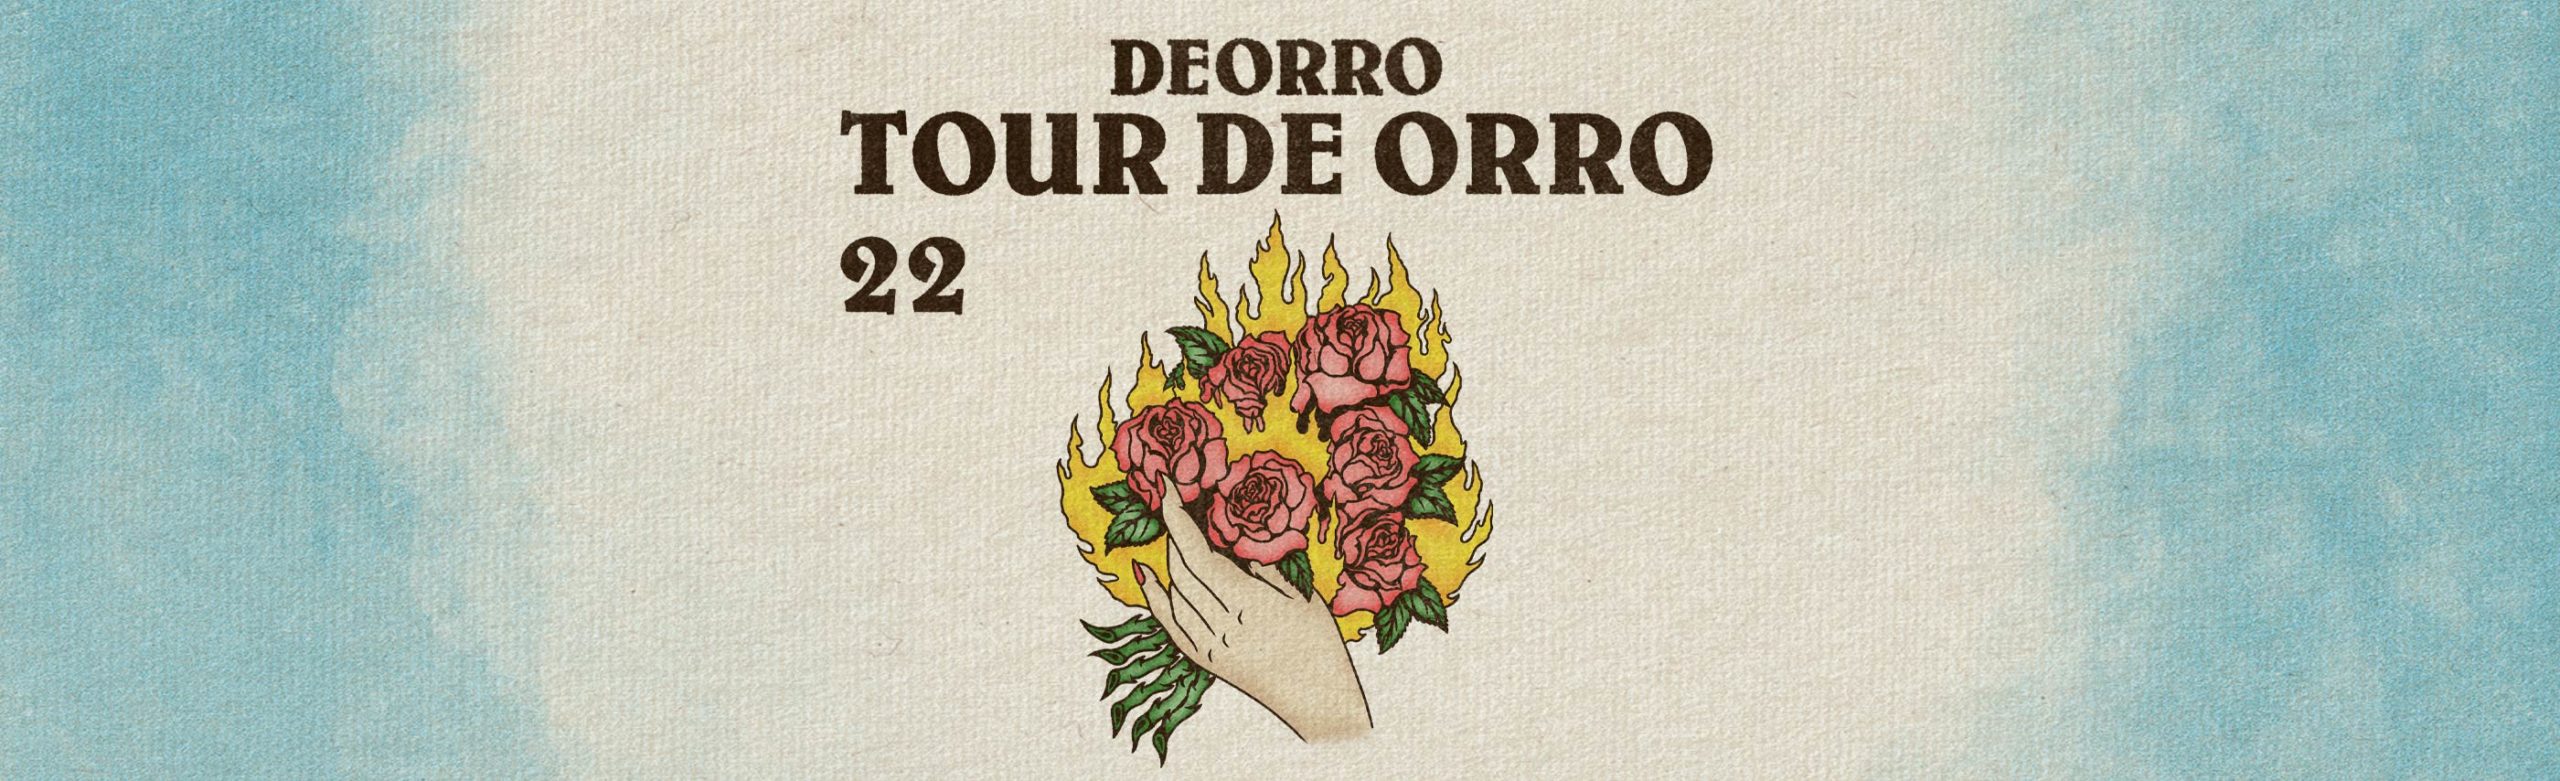 Deorro in Montana Ticket Giveaway 2022 Image